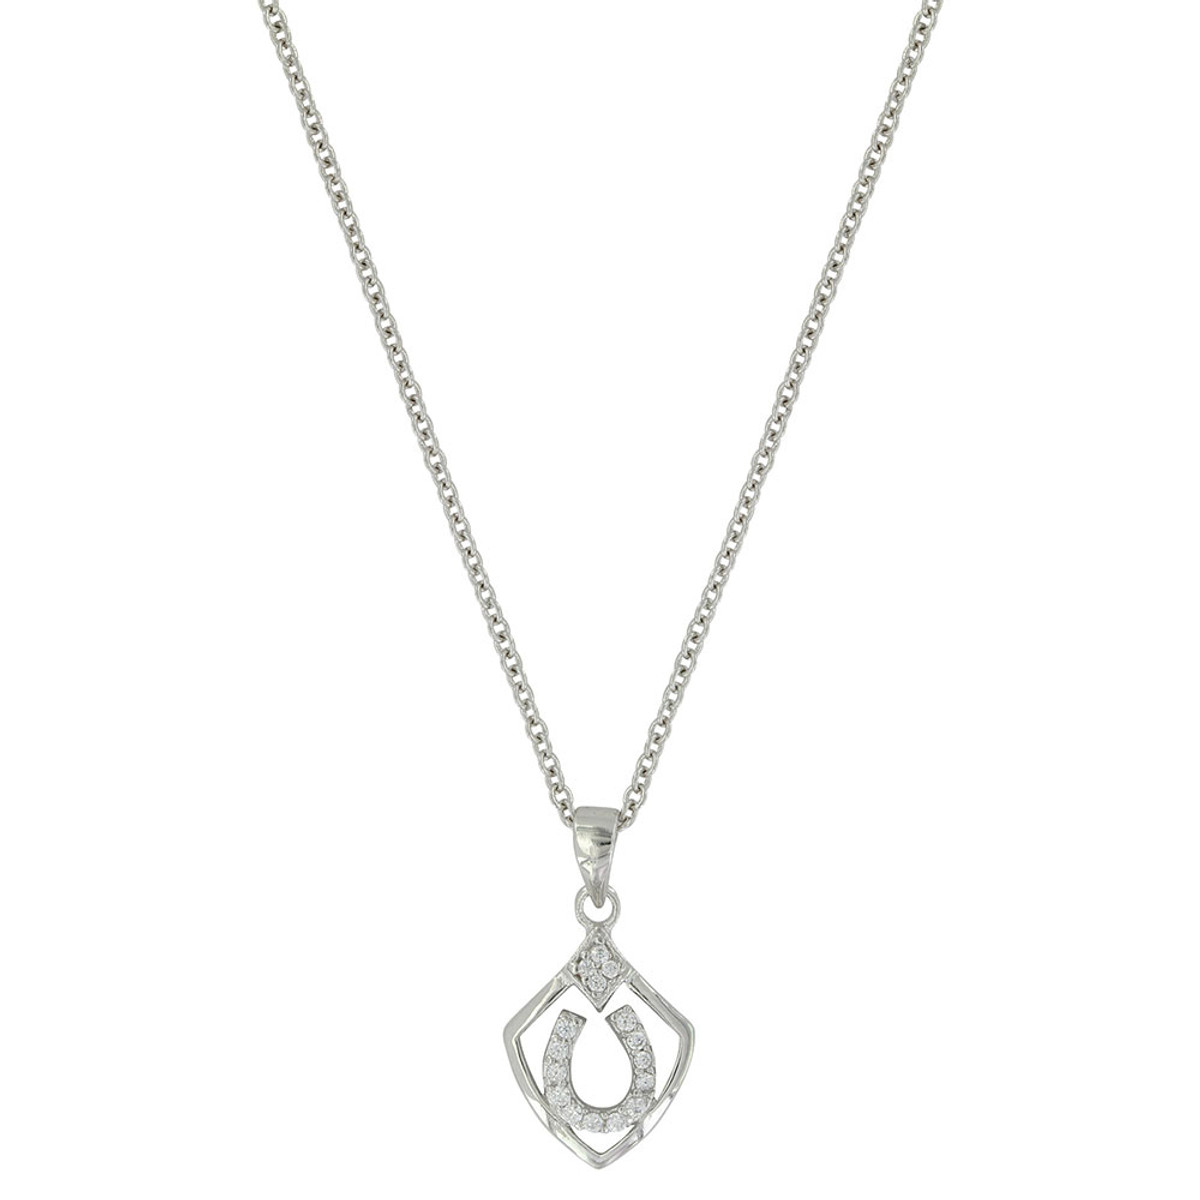 Montana Silversmiths Shielded in Horseshoes Necklace